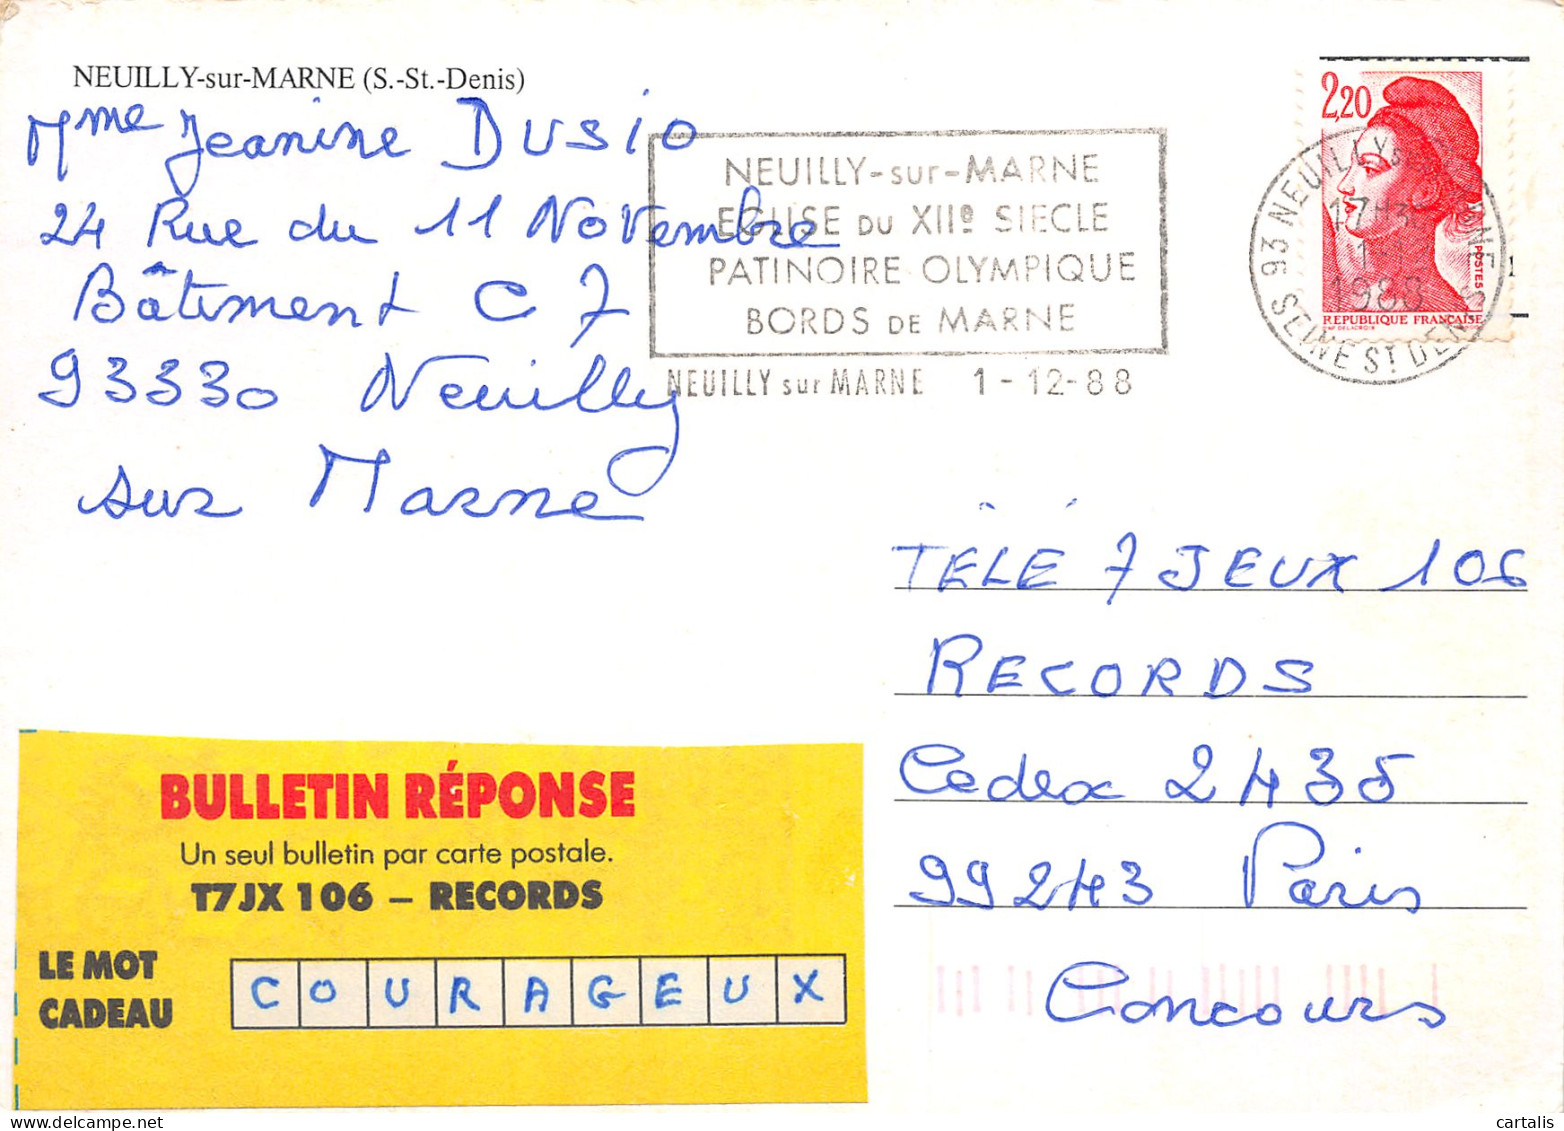 93-NEUILLY SUR MARNE-N°C-3633-A/0283 - Neuilly Sur Marne